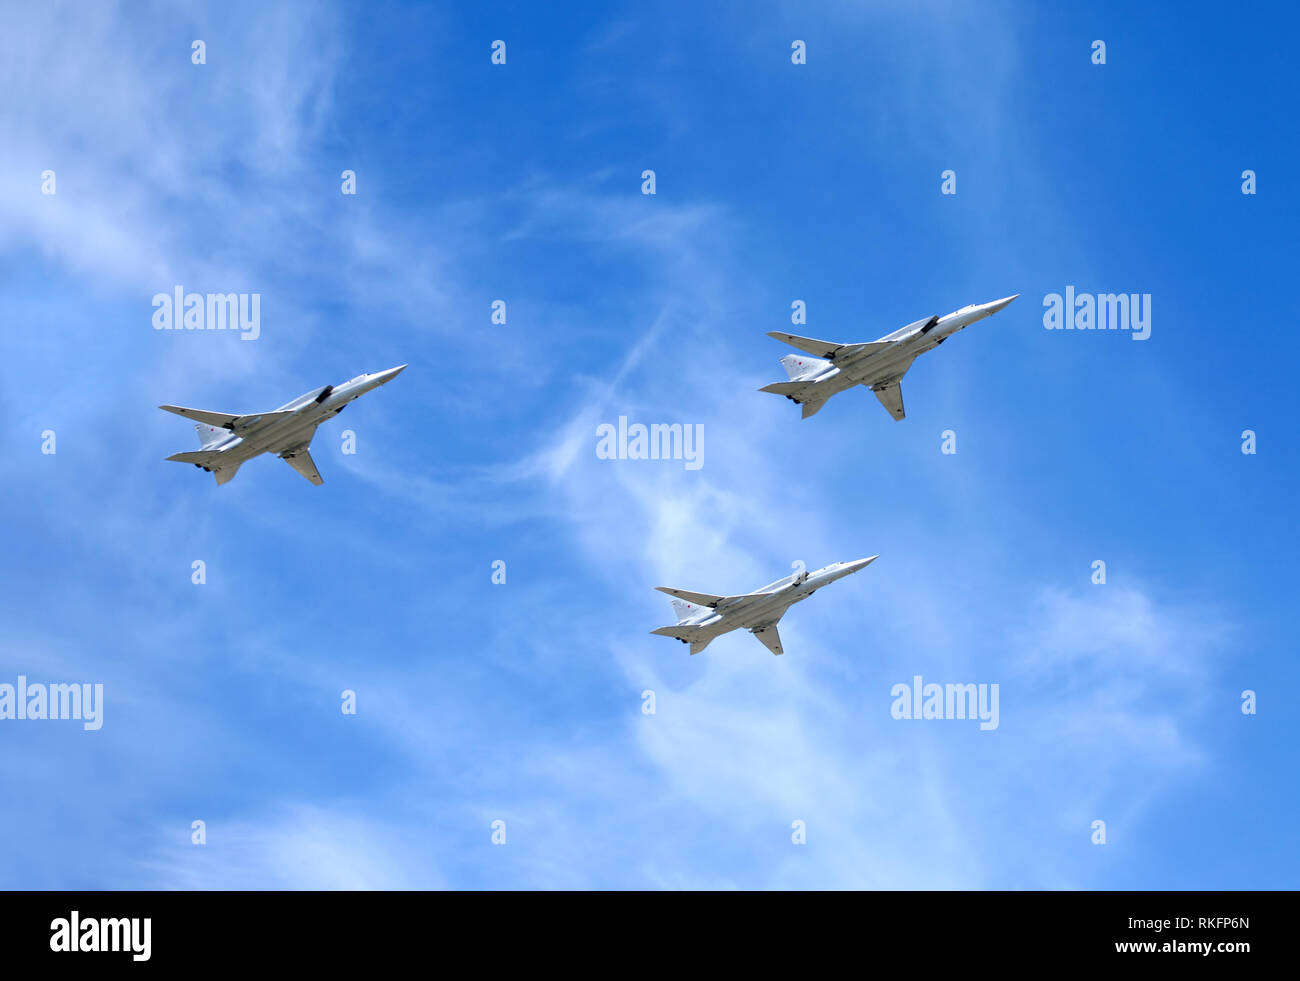 Military aircrafts TU-22M3. Supersonic bombers-missile carriers with variable sweep wing in flight in blue sky on May 9, 2015 in Moscow Stock Photo